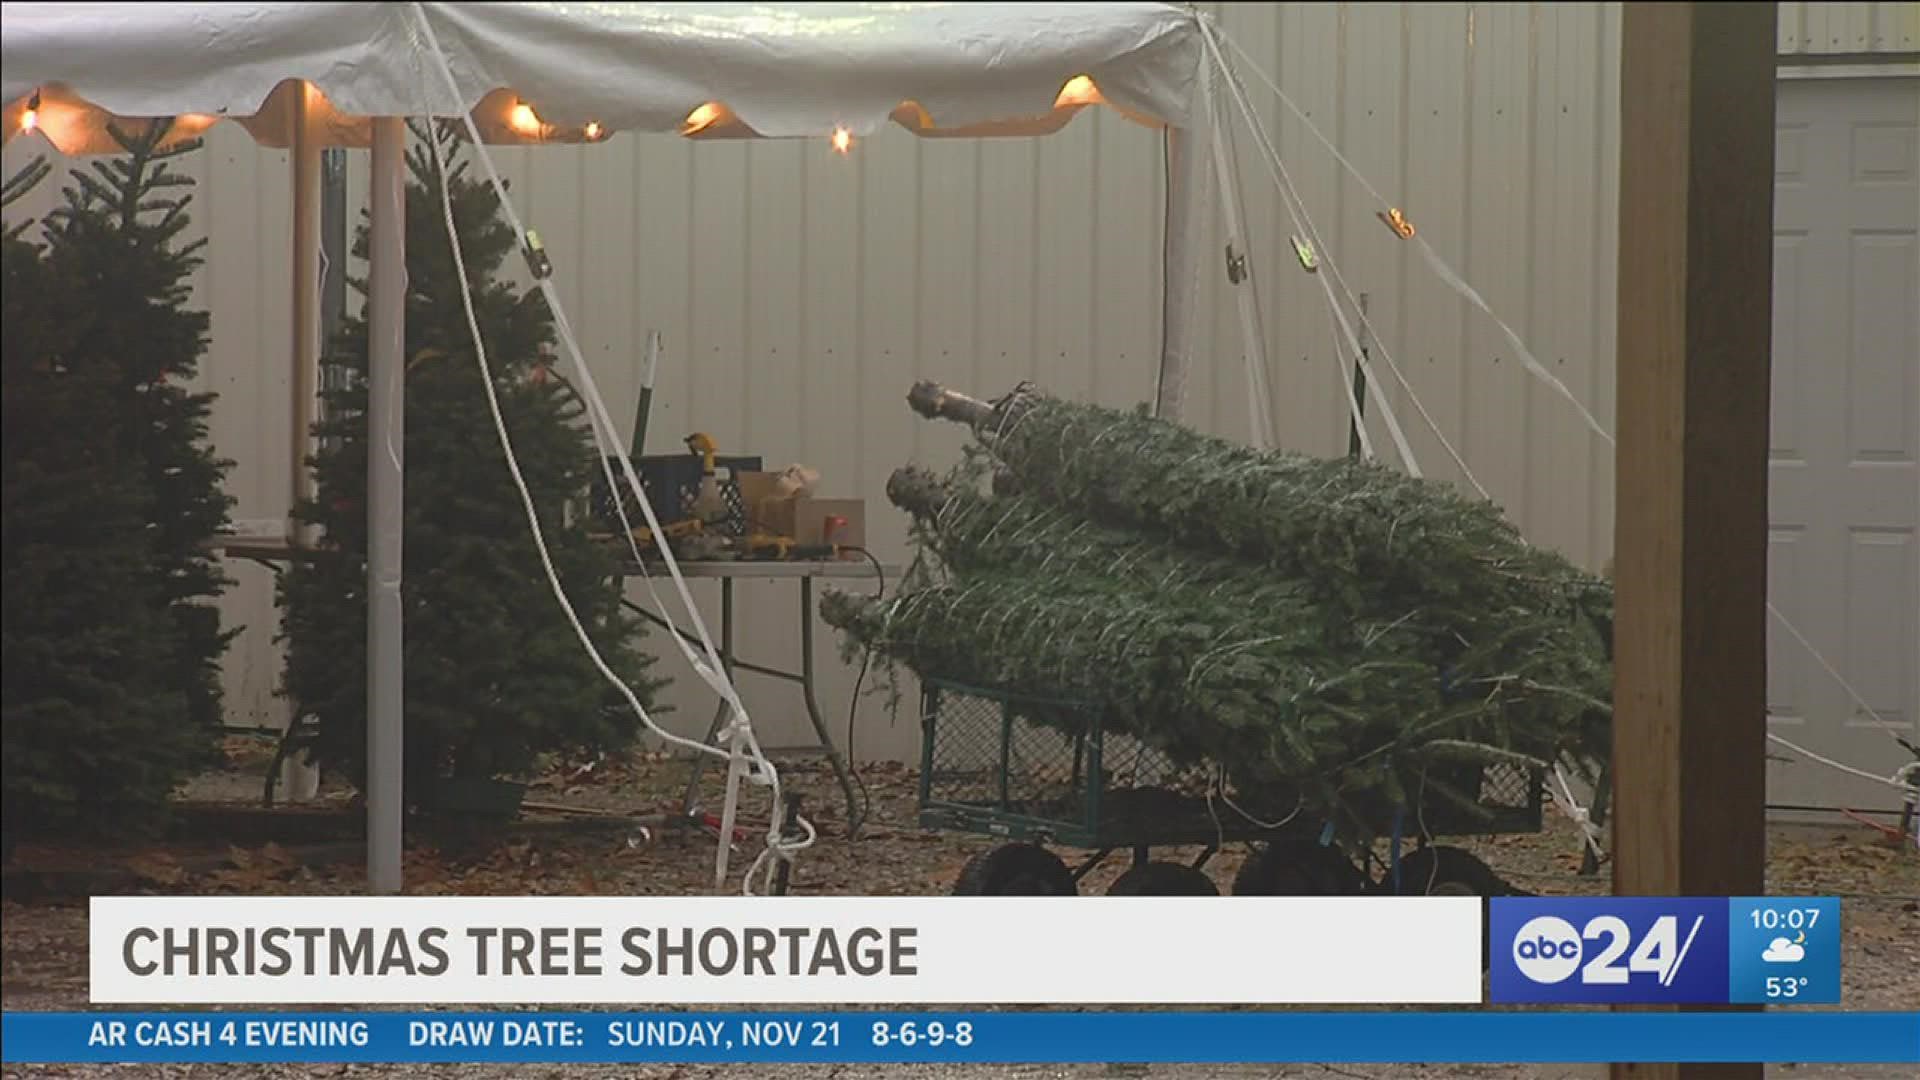 Supply chain issues coupled with effects from the 2008 Great Recession are leading to a shortage of both real and artificial Christmas trees this year.